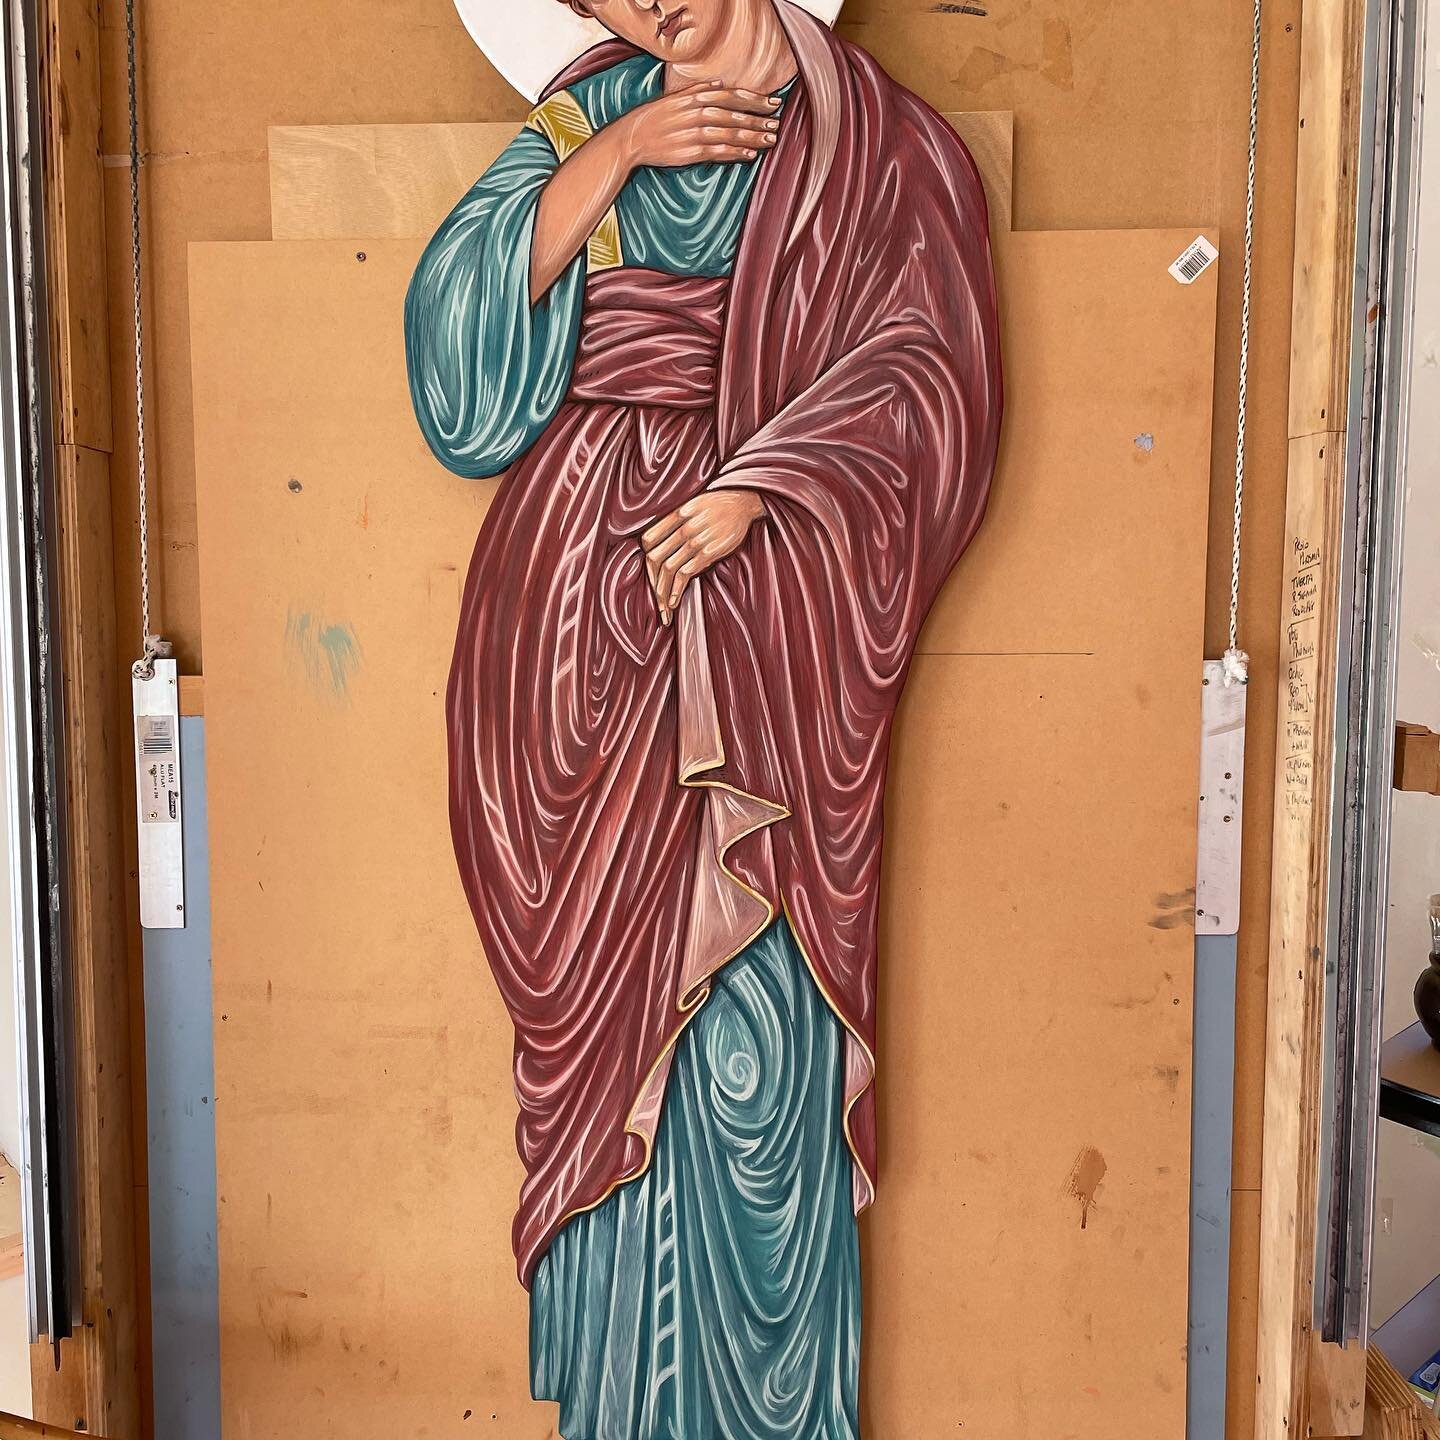 St John ready for a gold halo. Finished. #iconography #stjohntheevangelist #stjohnthedivine #eggtempera #catholicartist